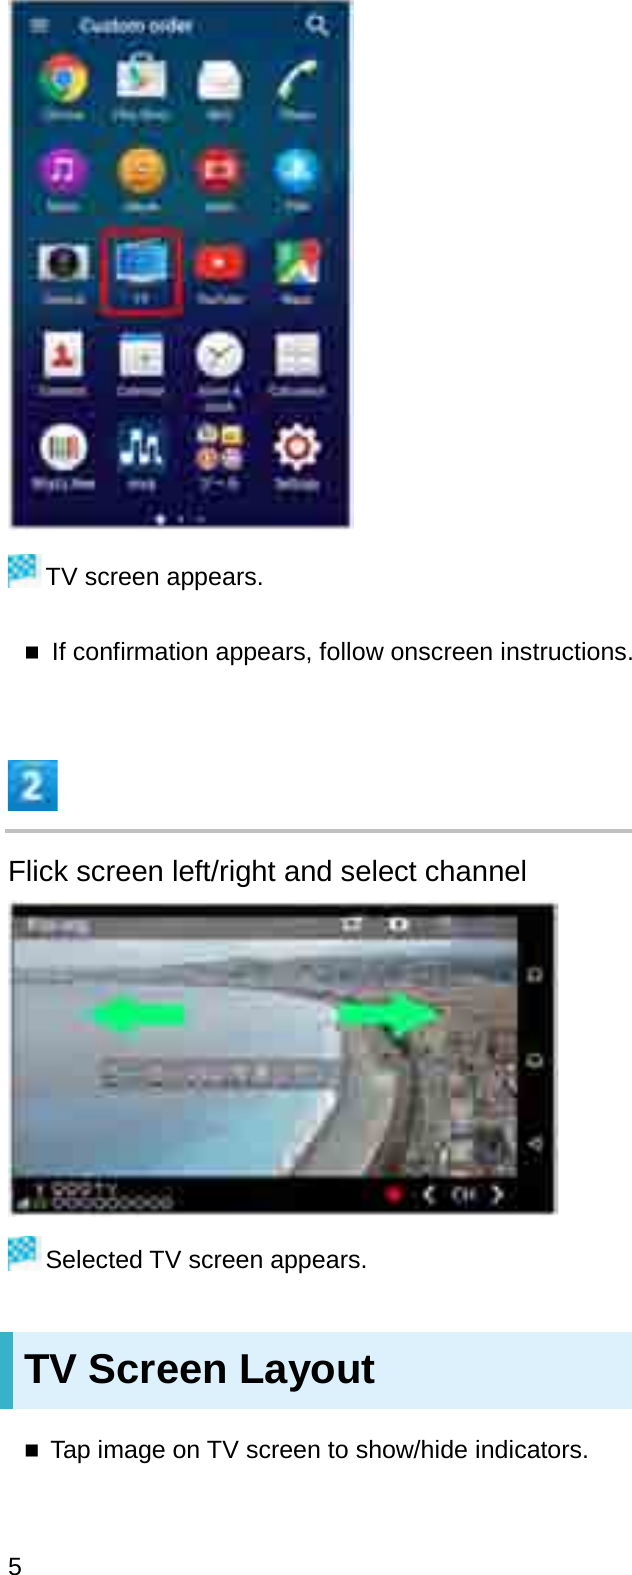 TV screen appears.If confirmation appears, follow onscreen instructions.Flick screen left/right and select channelSelected TV screen appears.TV Screen LayoutTap image on TV screen to show/hide indicators.5